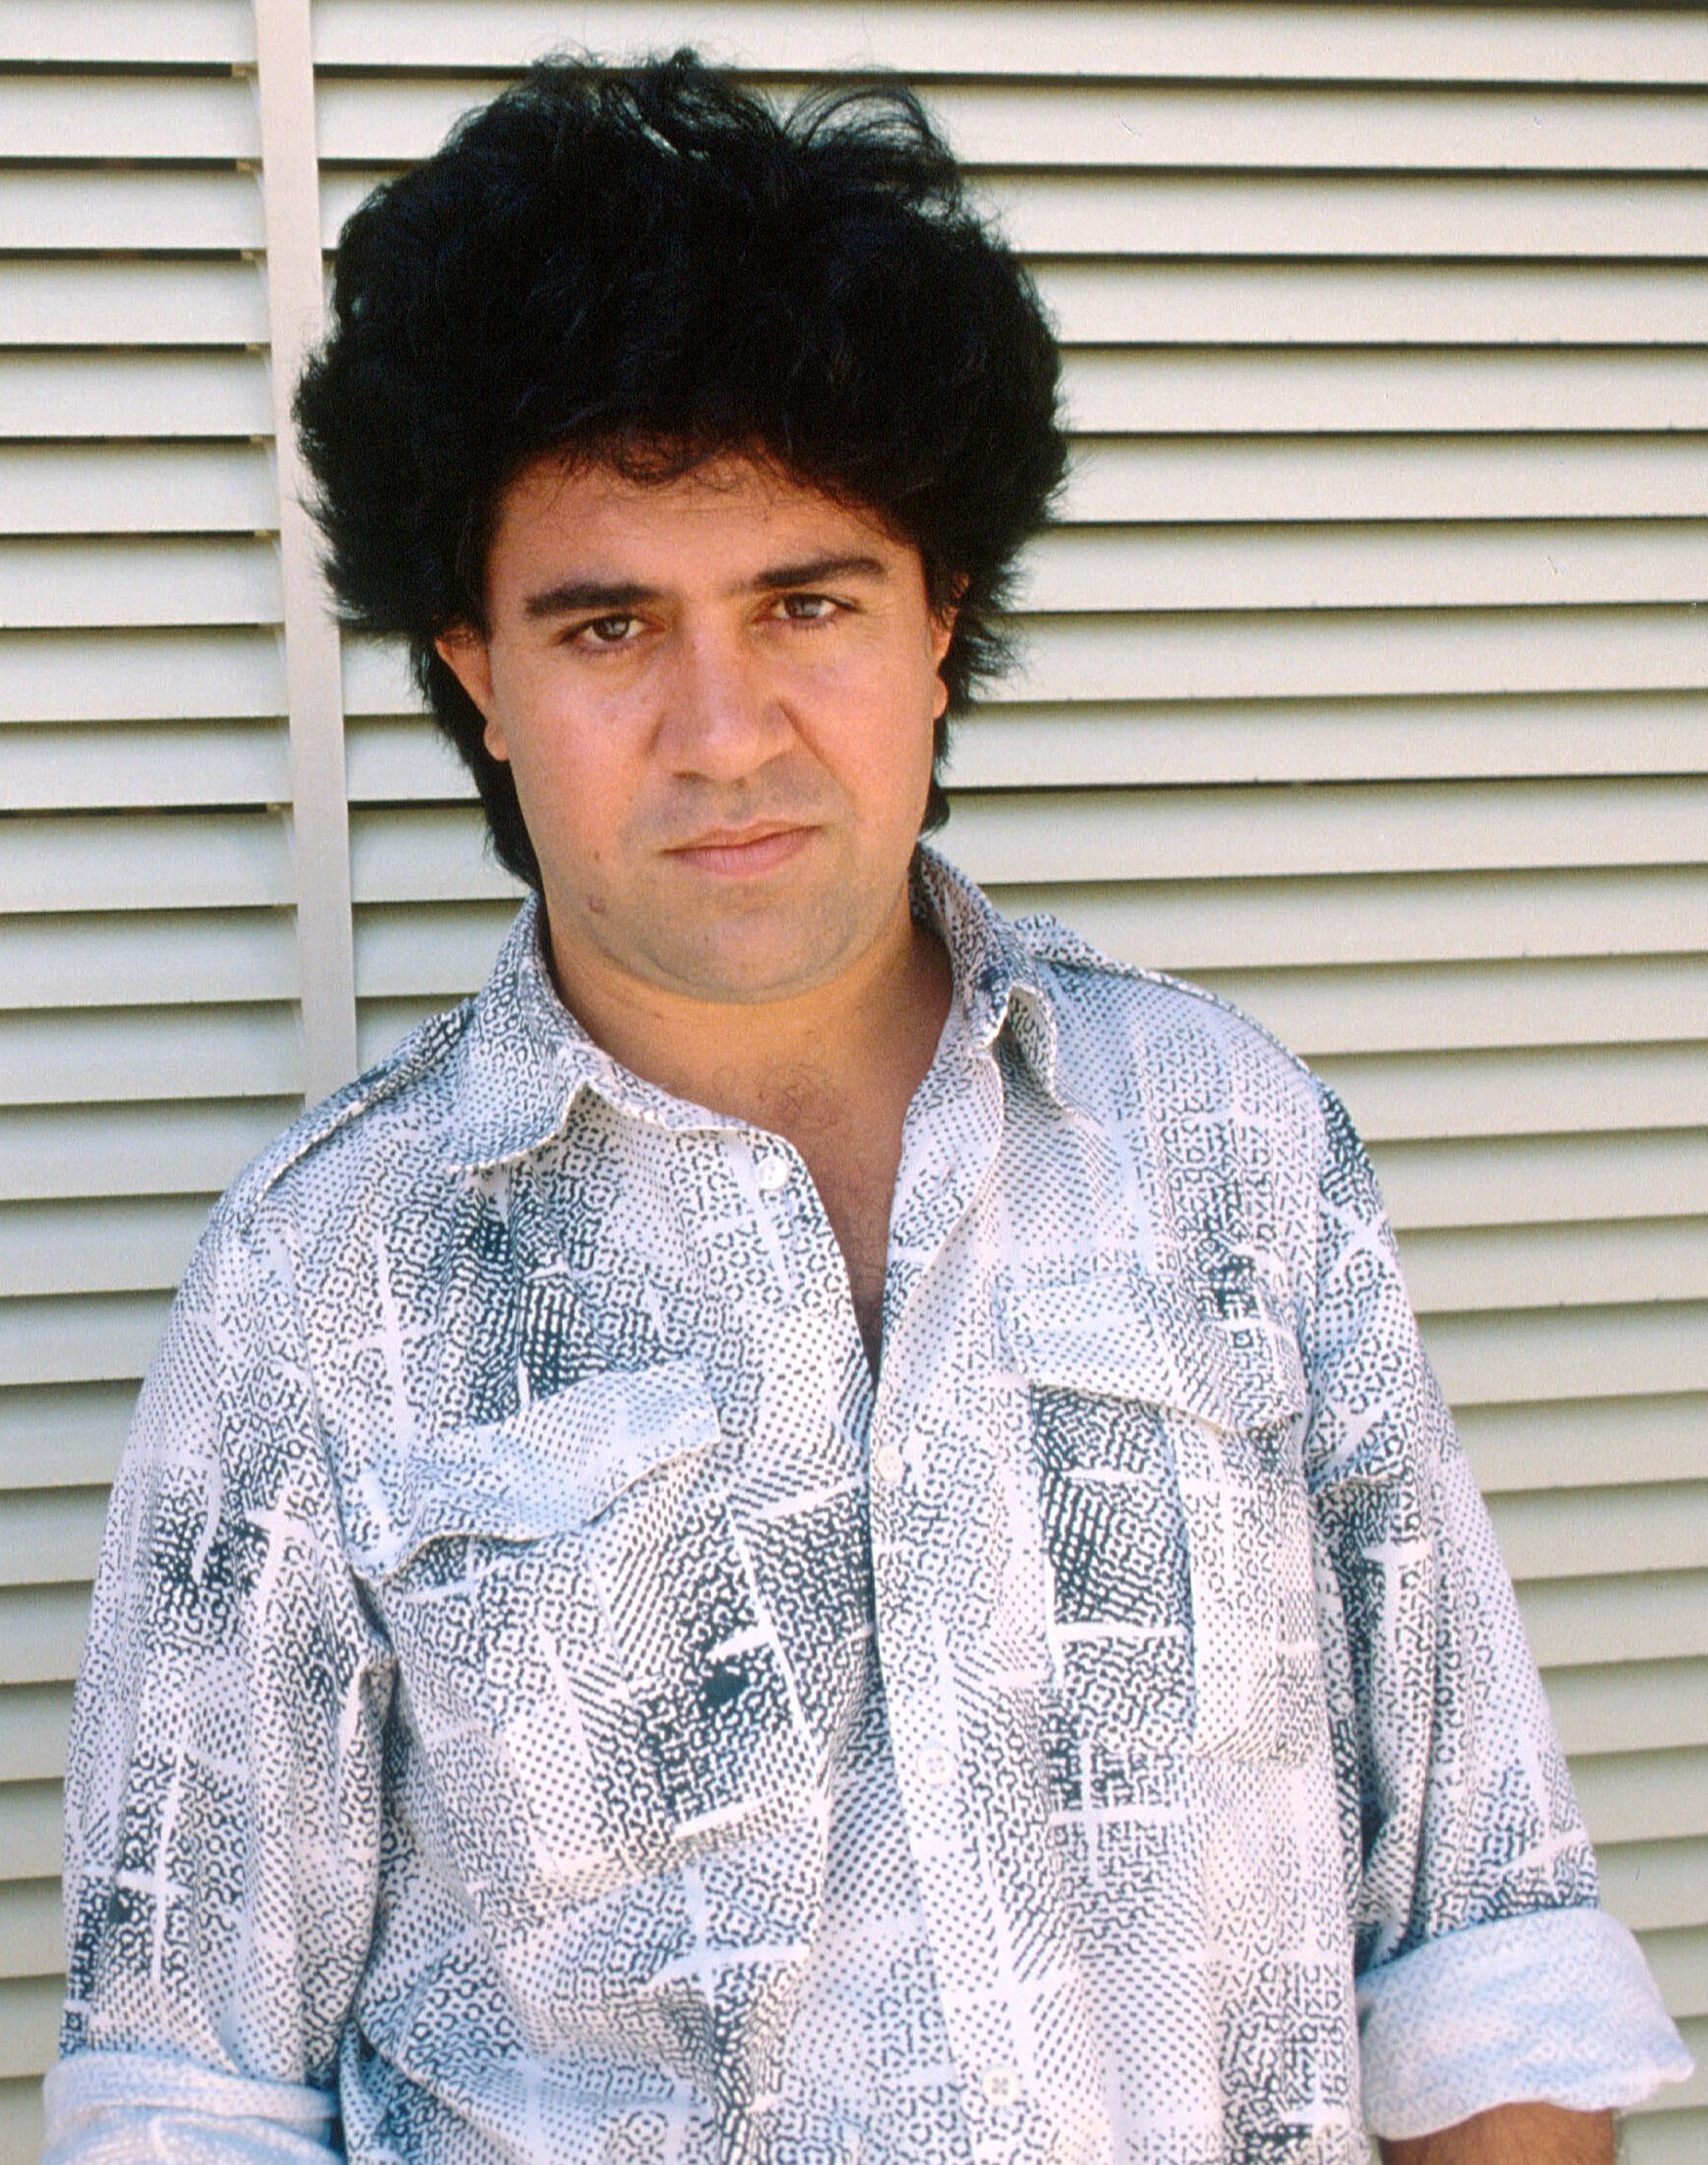 Image of Pedro Almodóvar from Wikidata